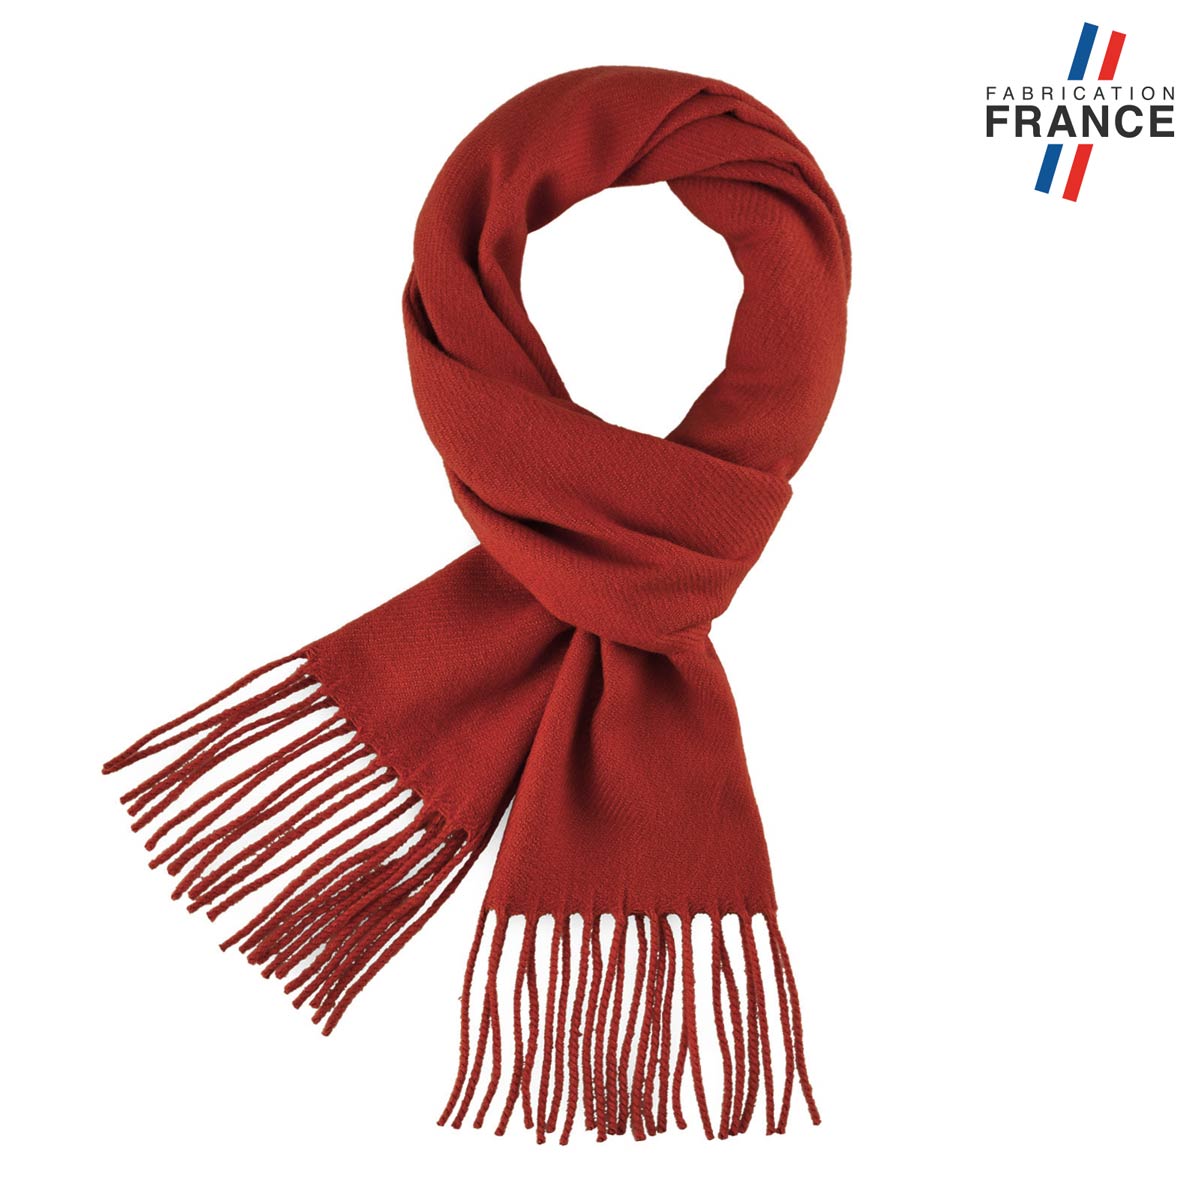 Echarpe-franges-rouge-baisers-fabrication-francaise--AT-06572_F12-1FR